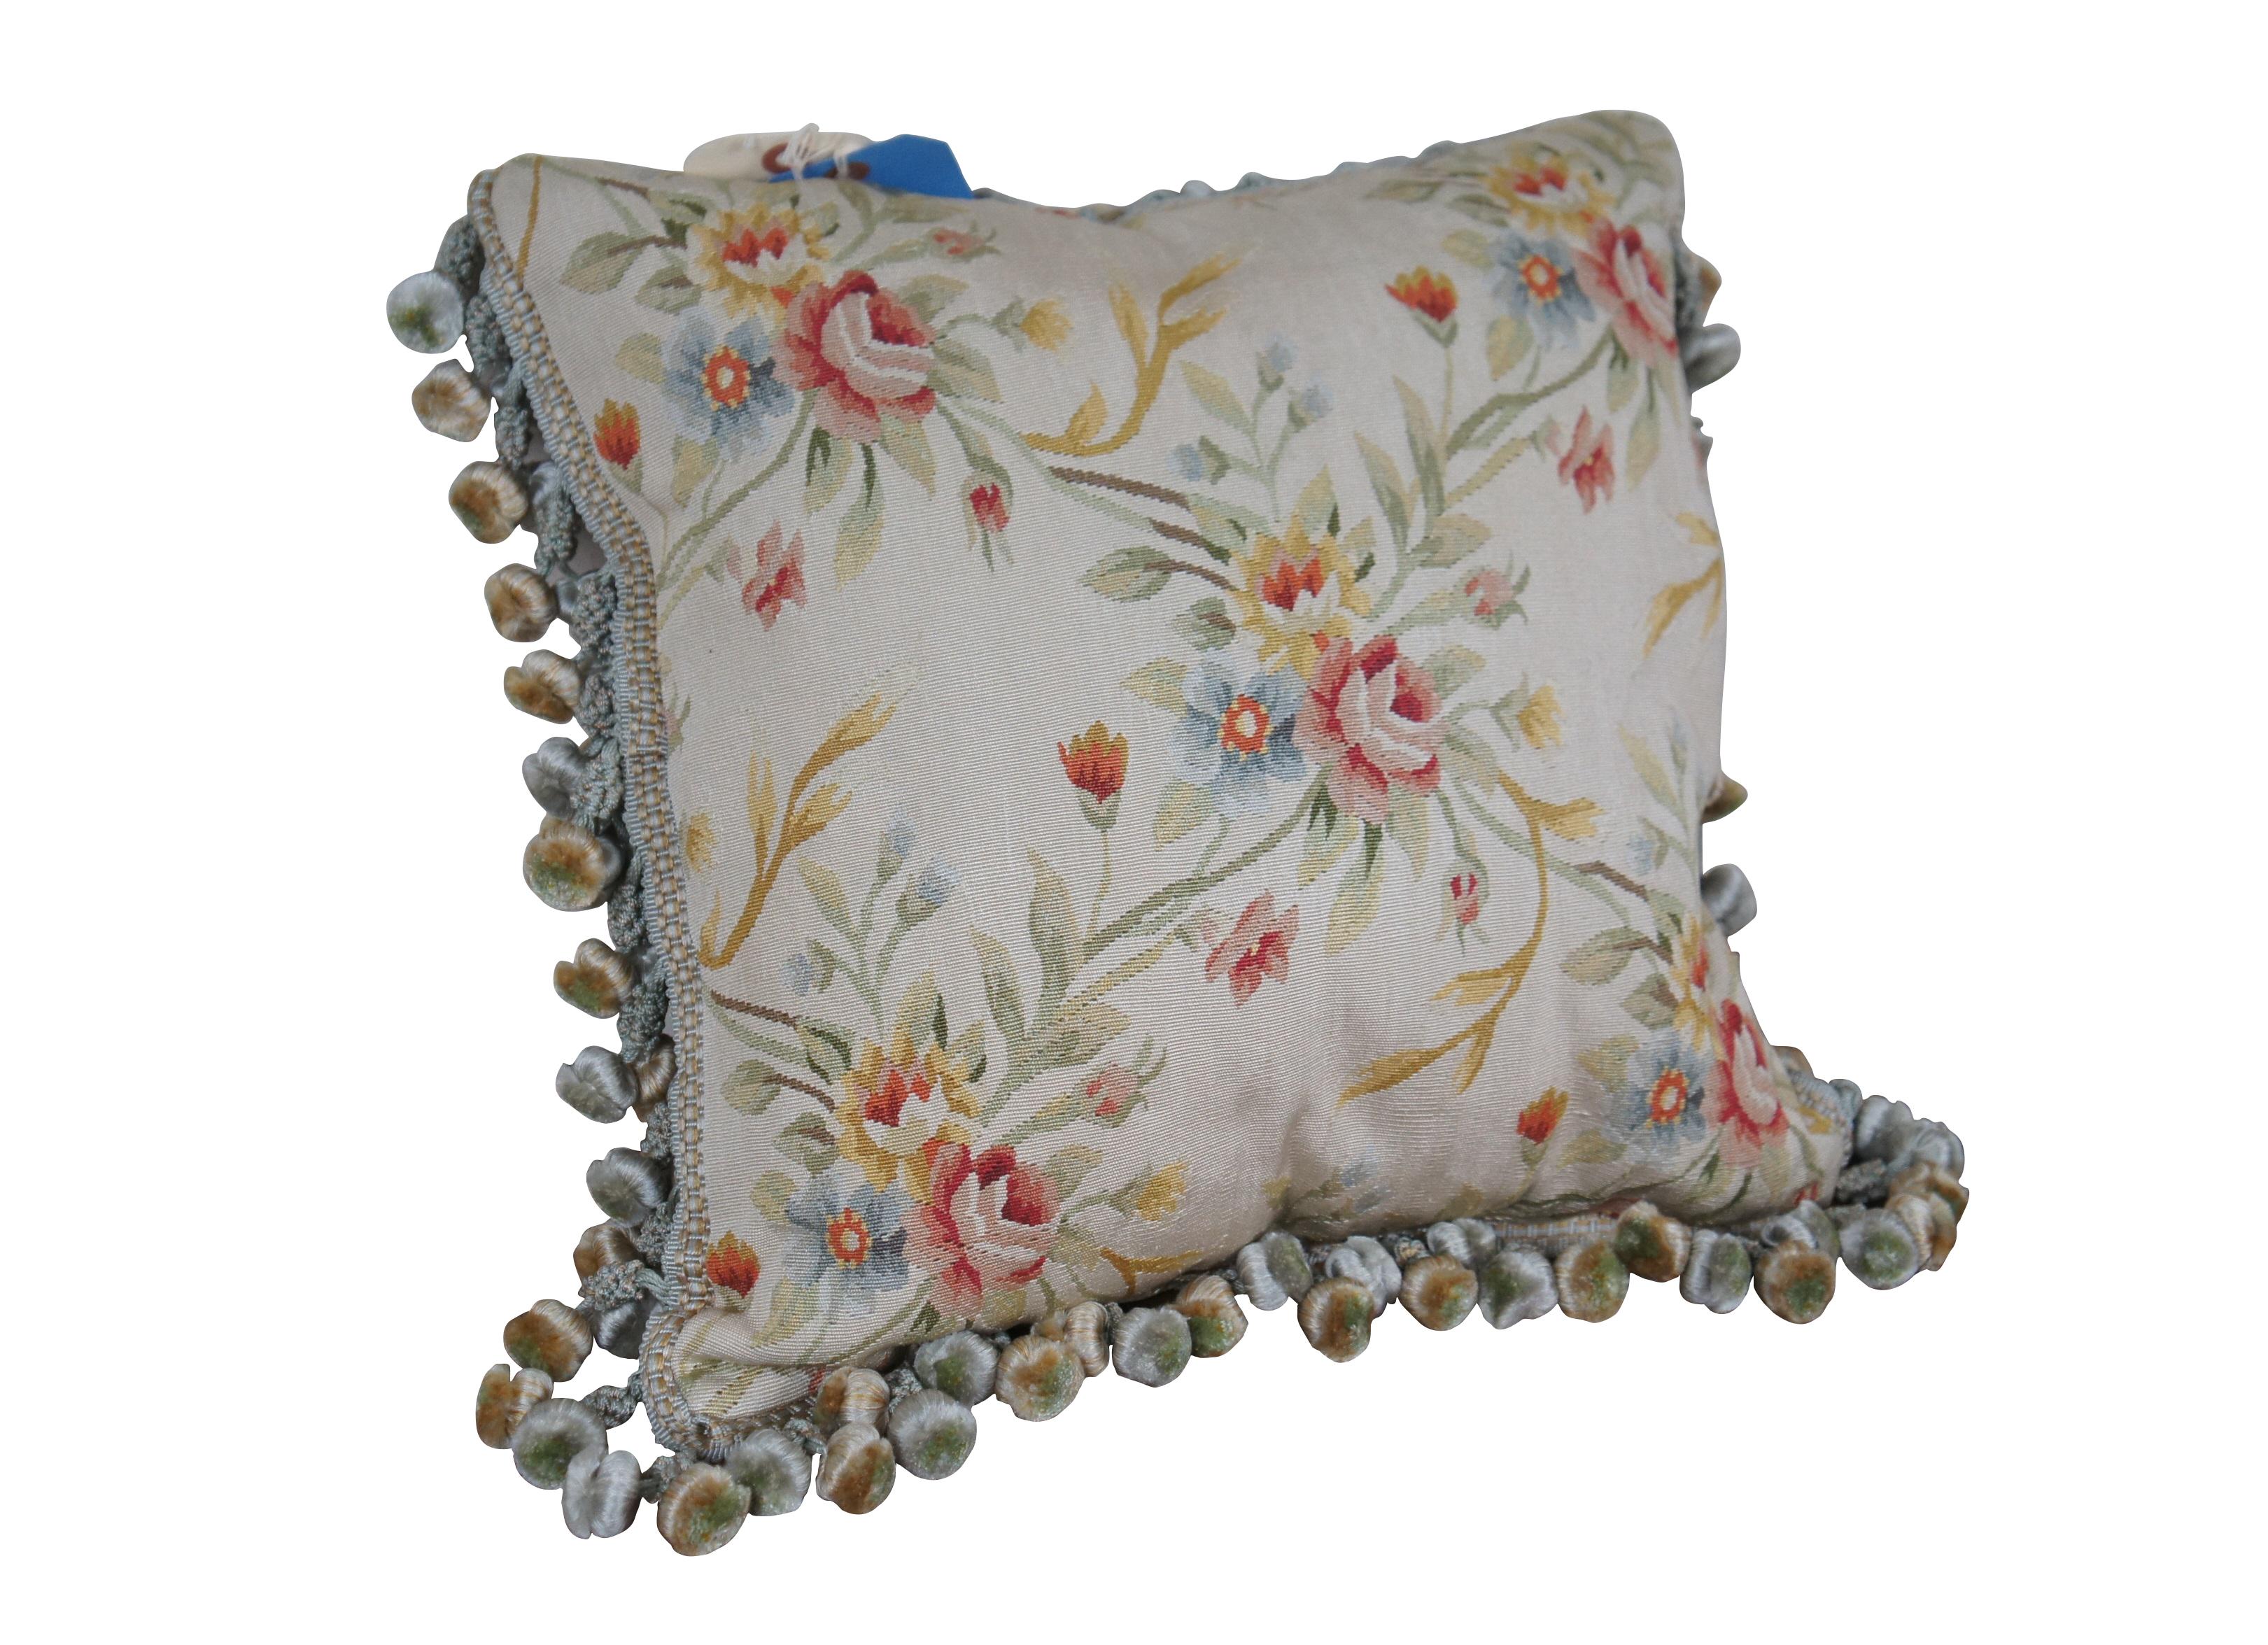 20th century square throw pillow,  embroidered in silk with bouquets of pink, yellow, blue and orange flowers, connected with green and yellow stems. Down filled. Light brown velour / velvet back with zipper closure. Blue and gold ball tassel